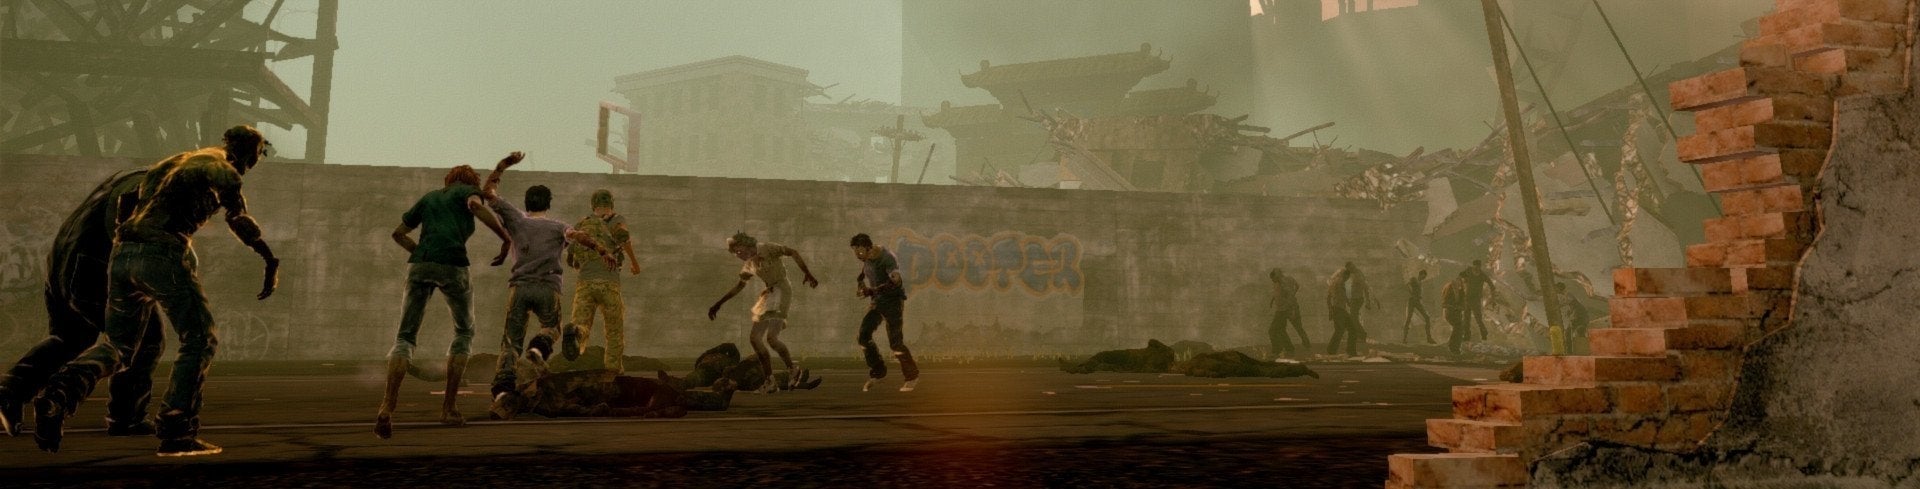 Image for State of Decay: Lifeline review